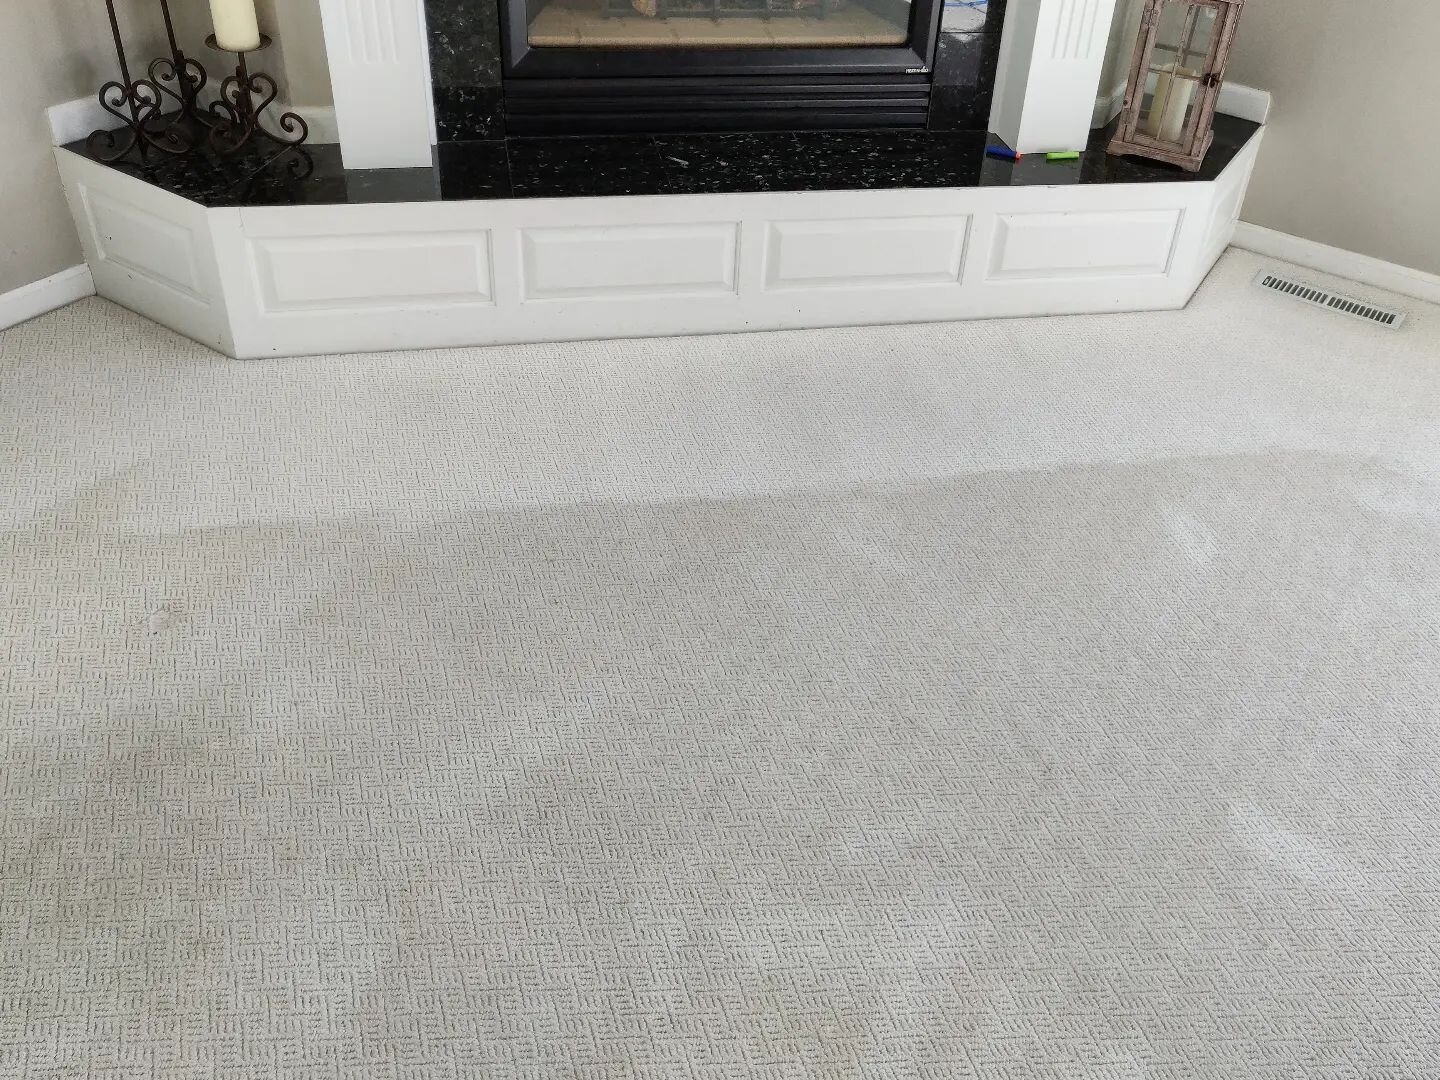 Professional carpet cleaning brings your carpet back to life. Call AJ Steam Cleaning today and schedule your cleaning! 952-446-4630